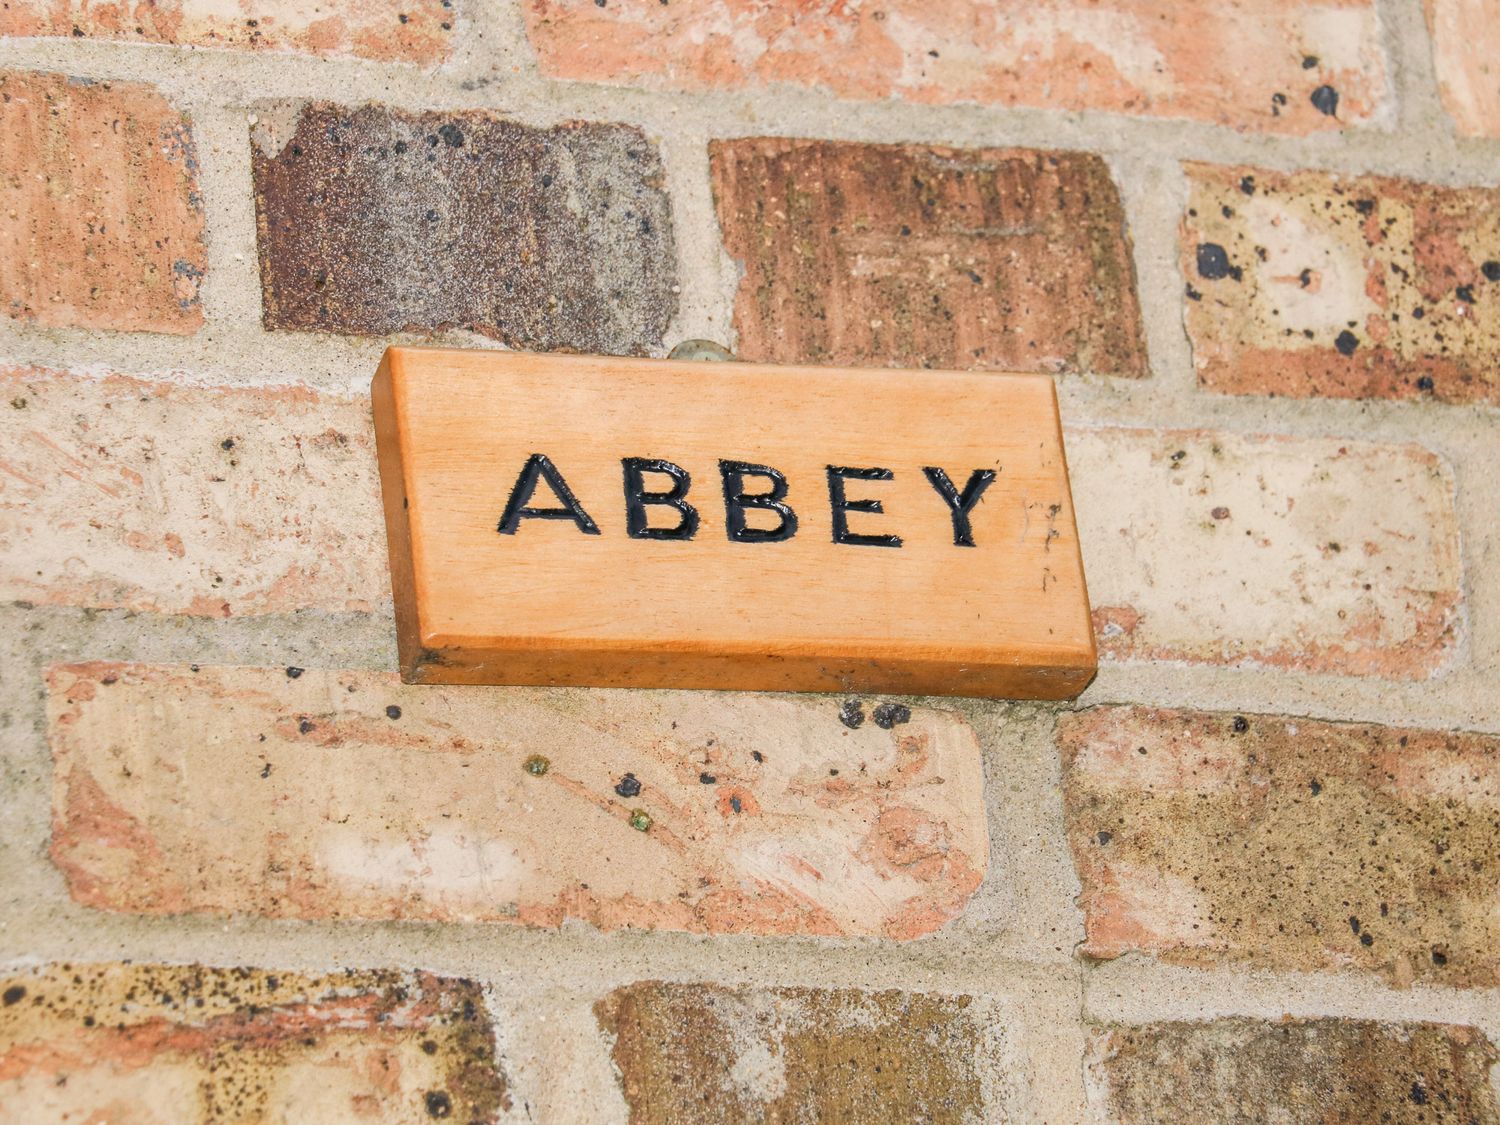 Abbey Cottage, Lincoln